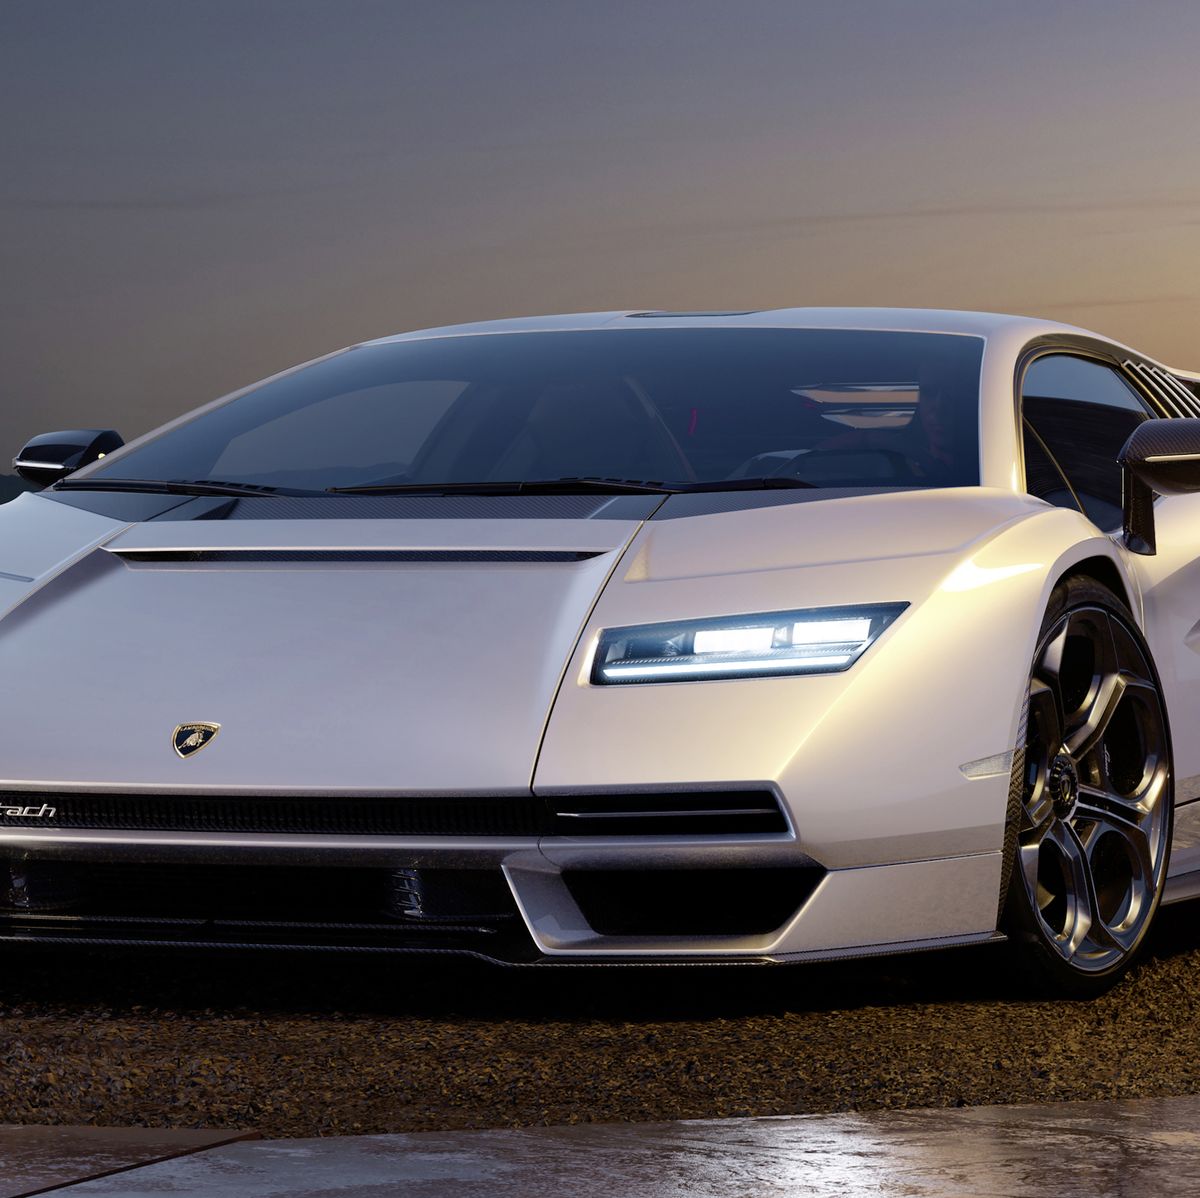 2022 Lamborghini Countach: Everything You Need to Know